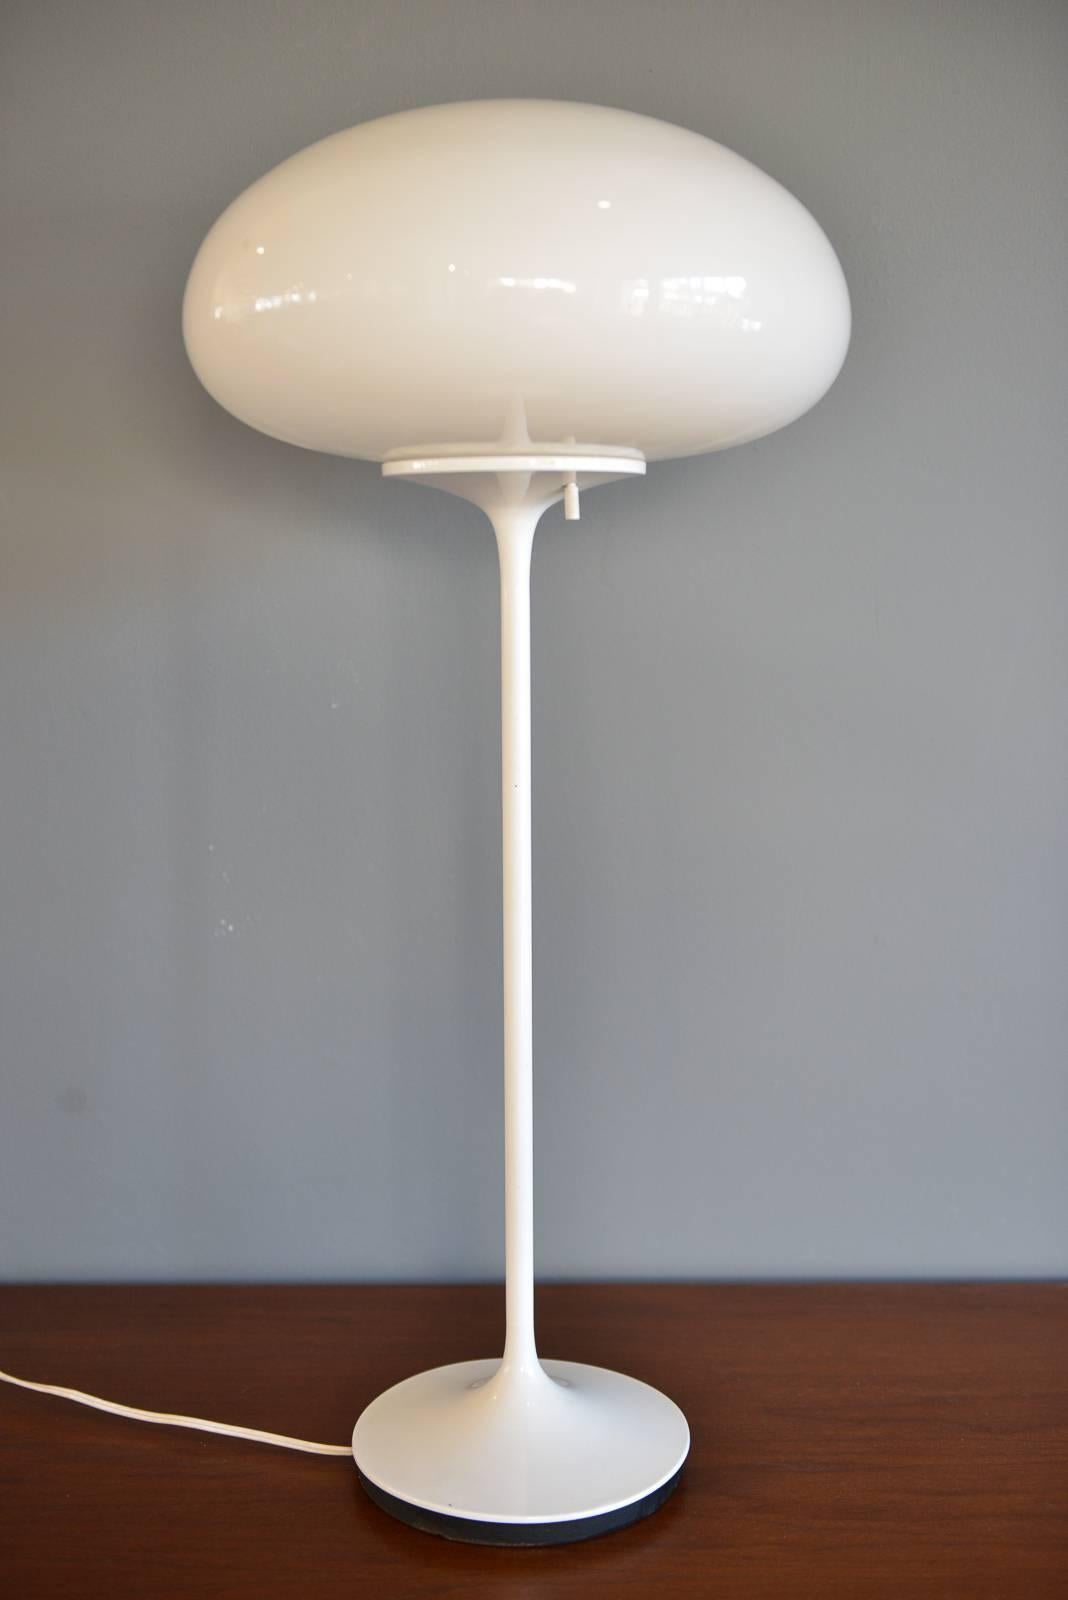 Pair of bill curry Stemlite for design line mushroom floor and table lamps. White enamel stems, original glass mushroom shades. Heavy solid iron bases, original wiring.

Floor lamp base has some wear as shown, table lamp is very good.

Price is for